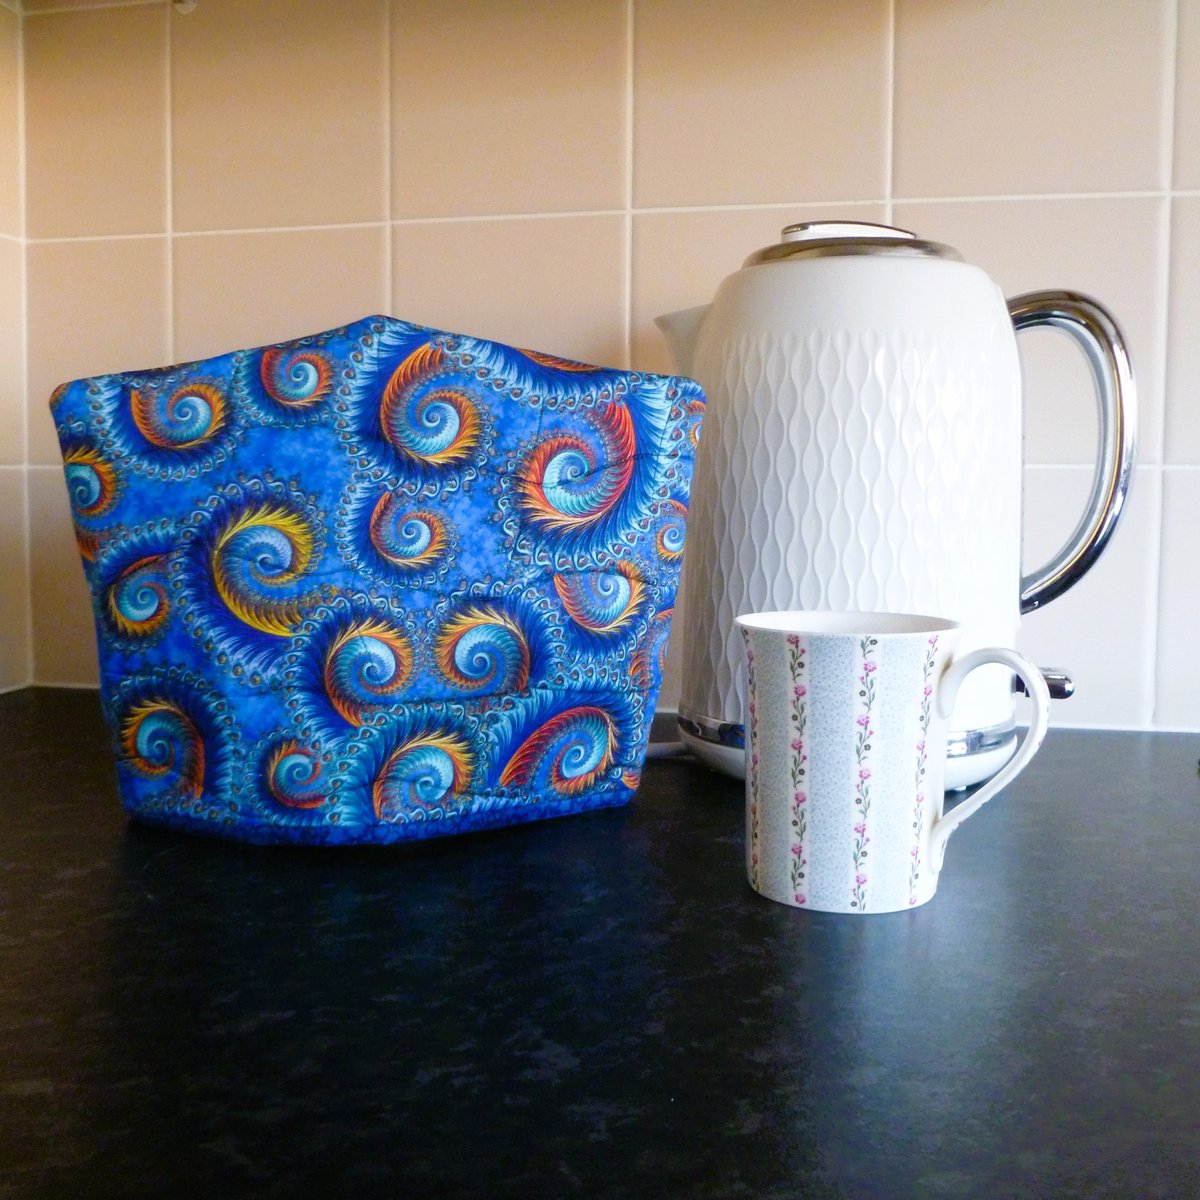 New in my Etsy shop. 
Link - daisychaincraftsukgb.etsy.com/listing/166311…
Handmade quality 100% cotton fabric tea cosy with insulated wadding for 2 cup teapot
#teacosy #teacozy #CraftBizParty #etsyshop #etsyuk #etsyhandmade #ukmakers #insulatedcosy #giftsforher #housewarminggift #cosy #cozyforteapot